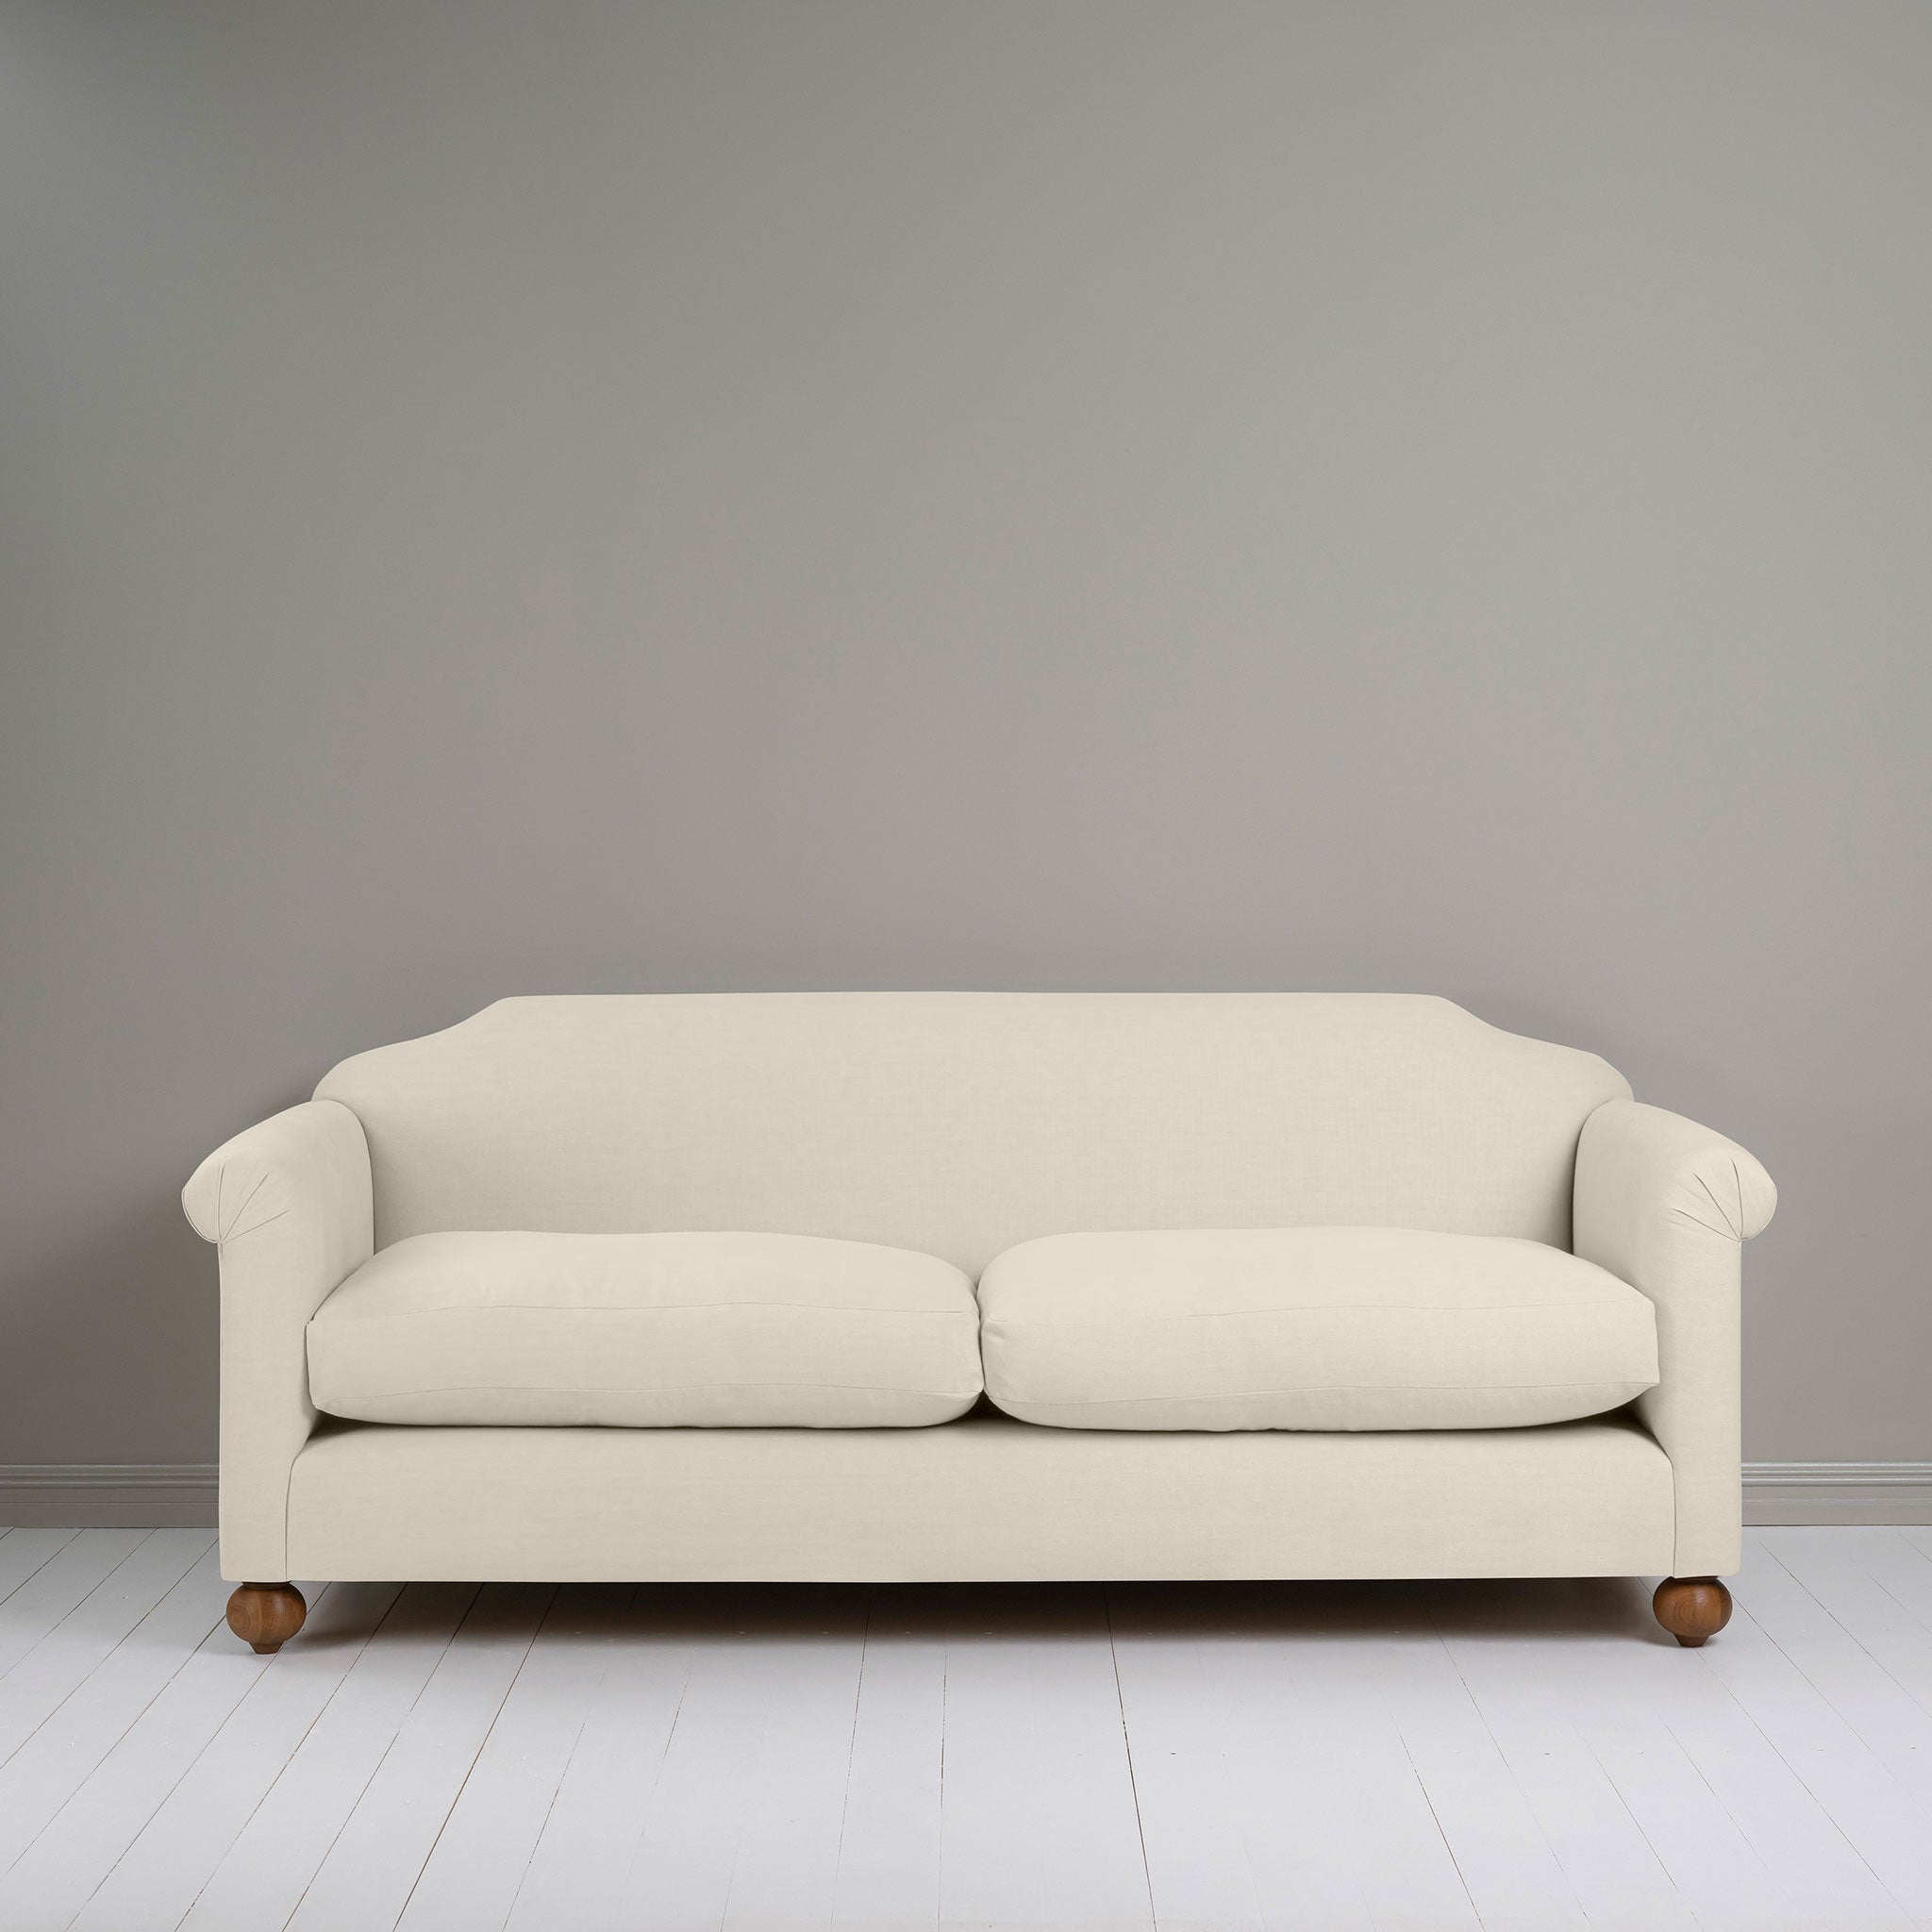  Dolittle 4 seater sofa in Laidback Linen Dove 